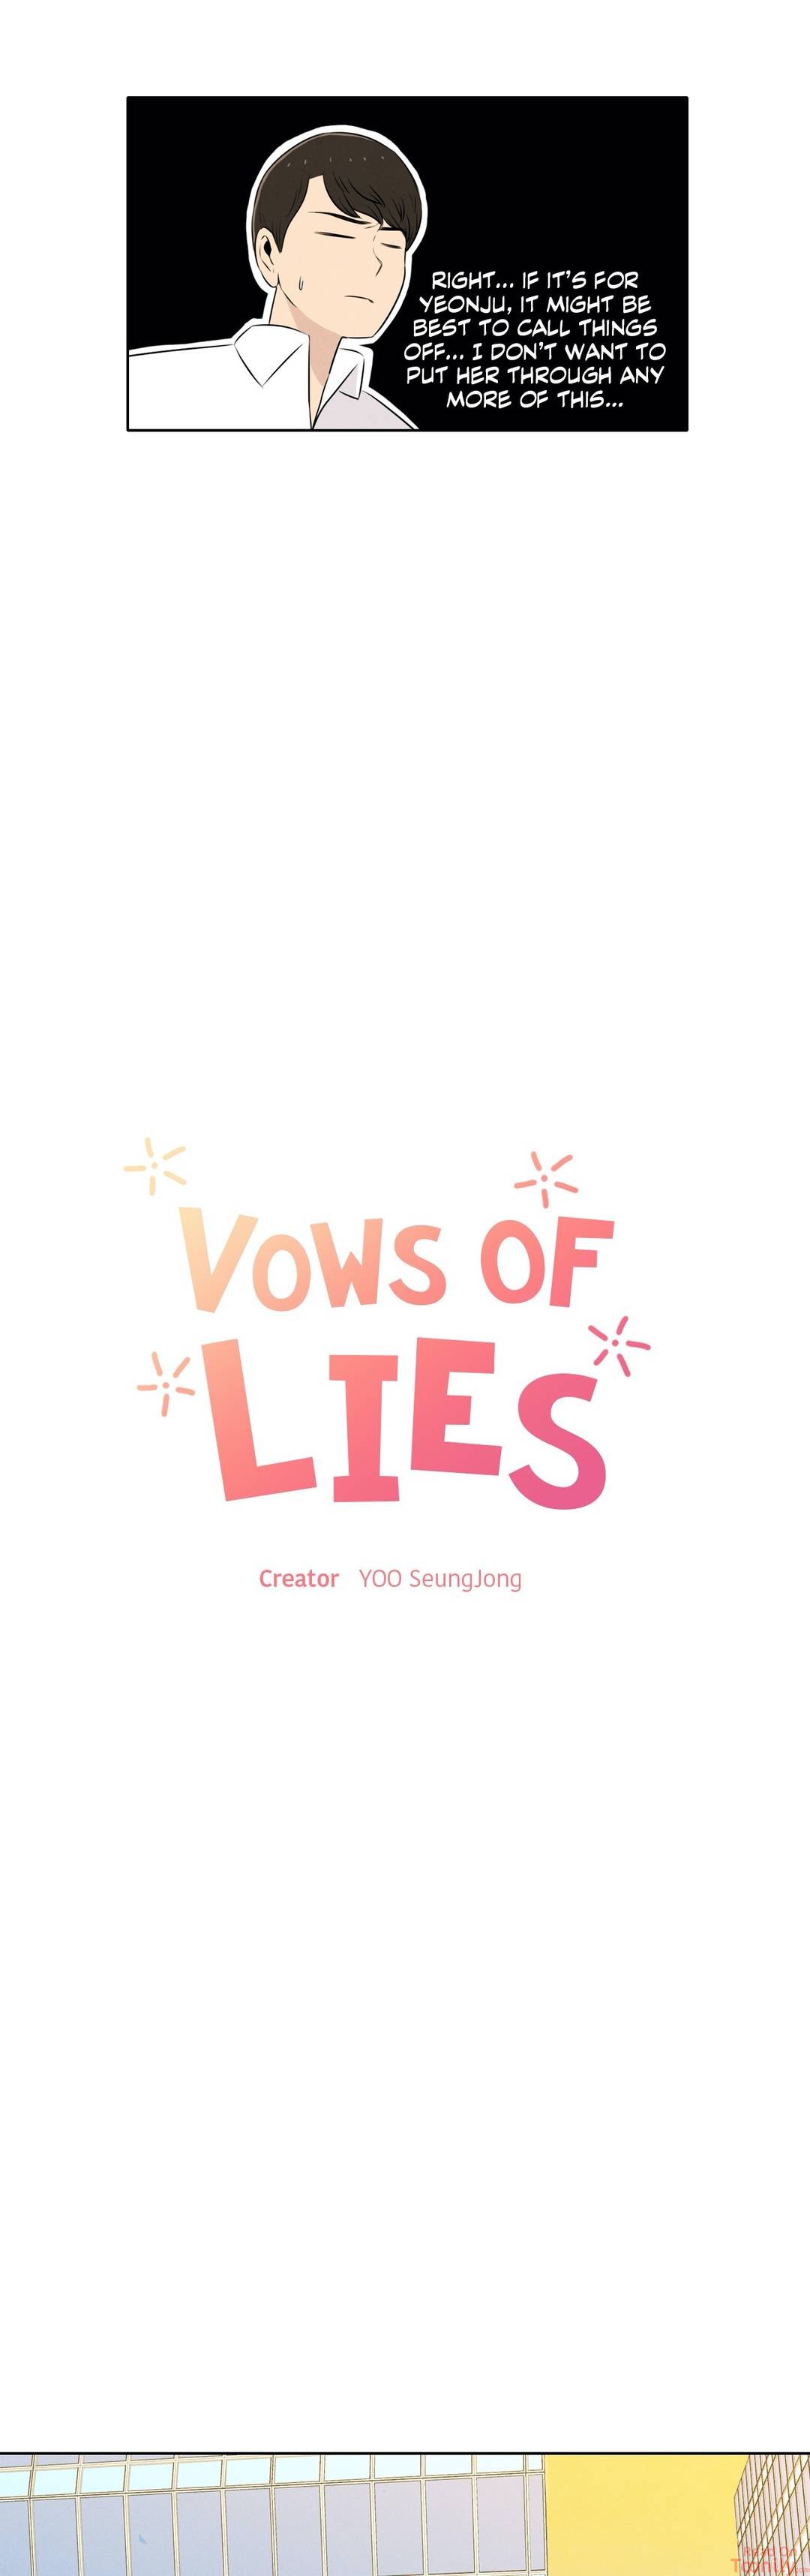 Vows of Lies image